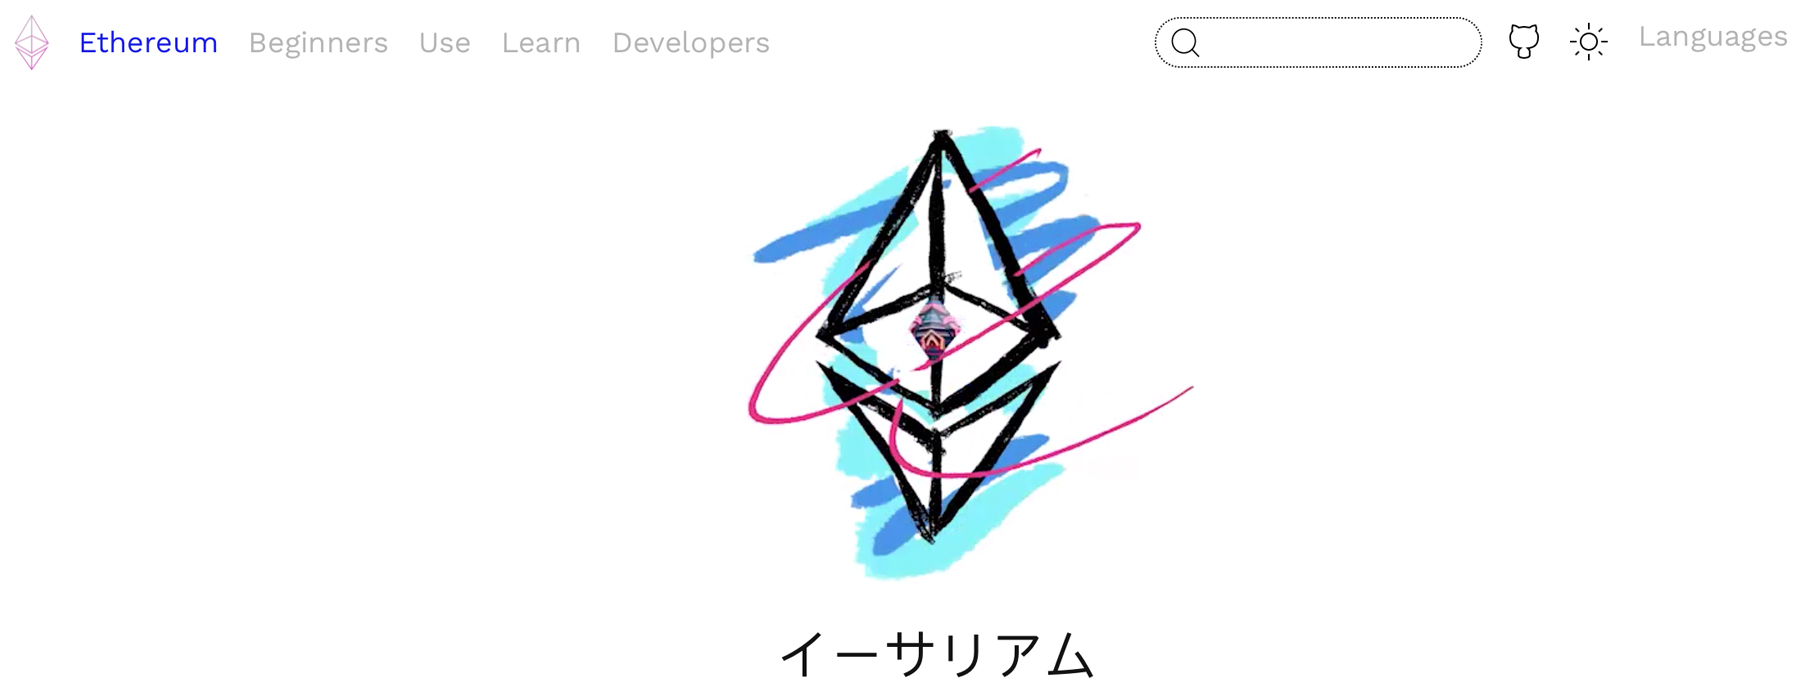 Ethereum Name Service Adds Infrastructure for Multi-Currency Support 